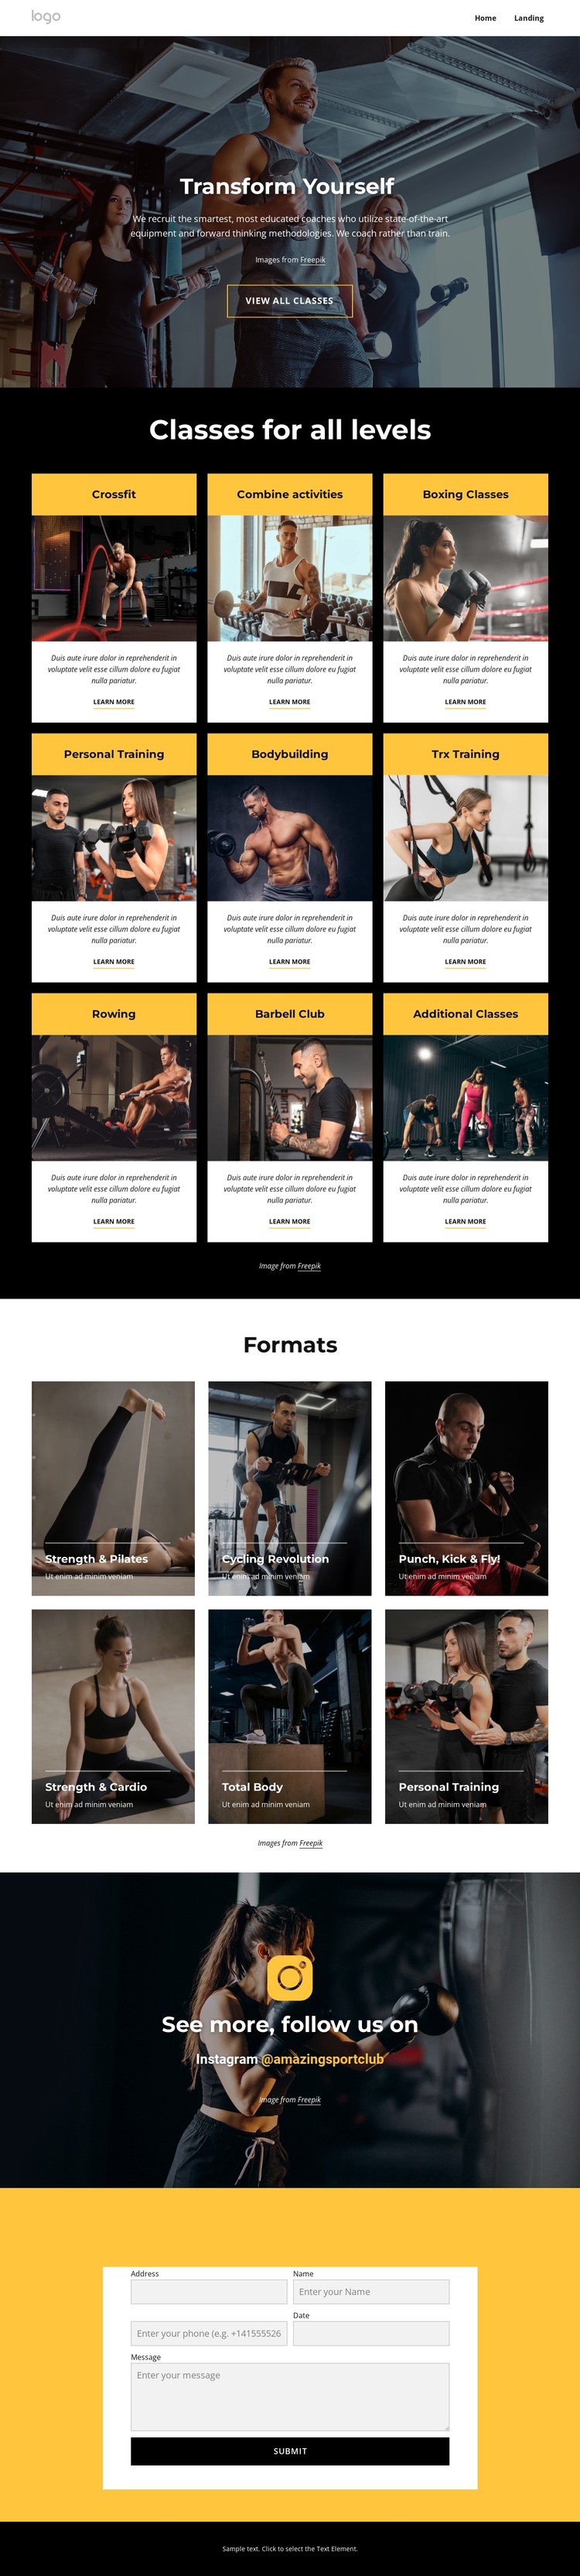 Fitness classes, indoor pools CSS Template